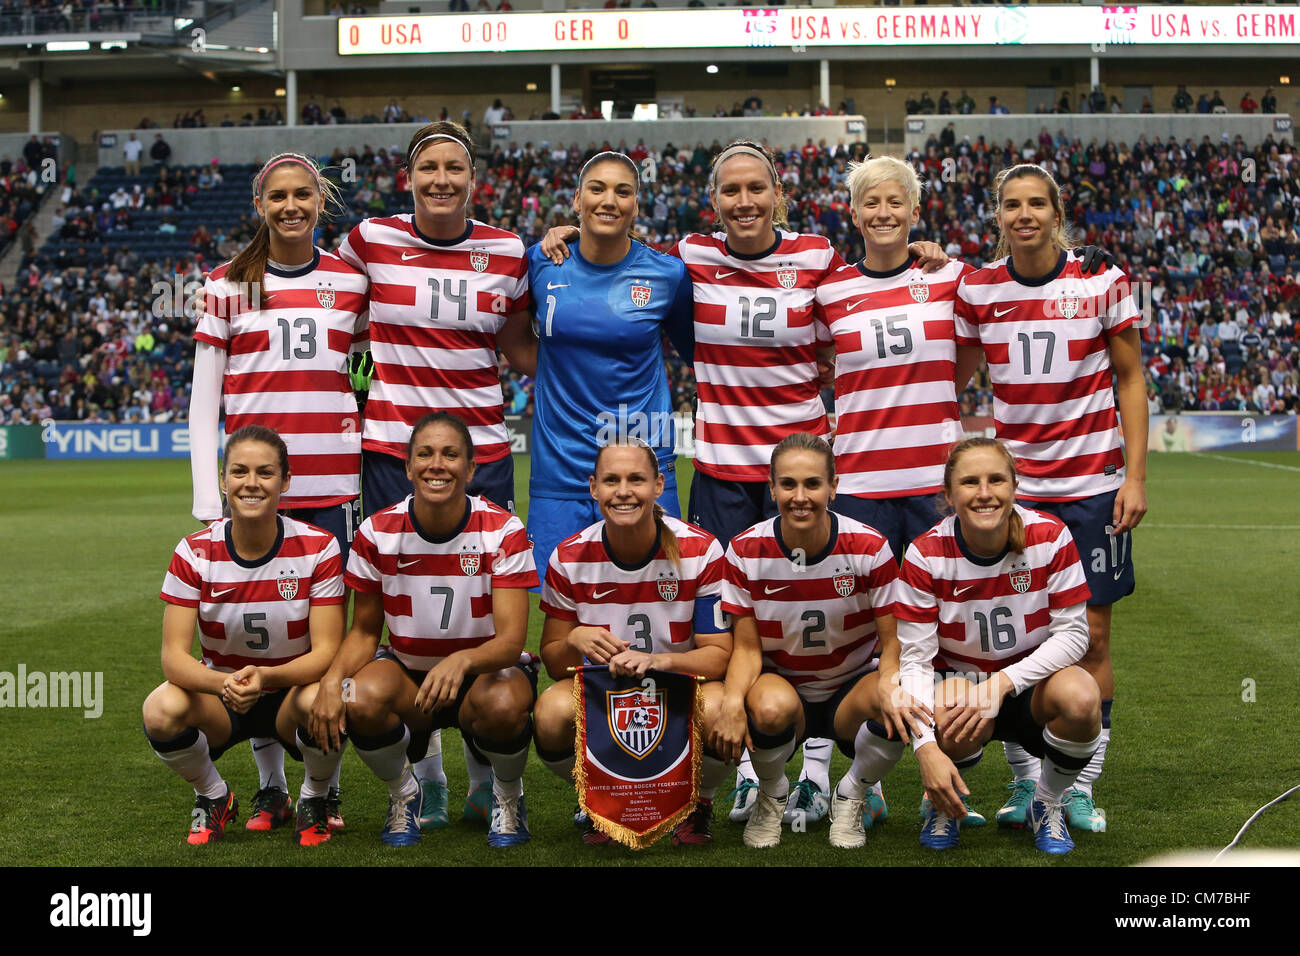 20.10.2012. Chicago, USA.  U.S. starters. Front row (left to right): Kelley O'Hara (USA), Shannon Boxx (USA), Christie Rampone (USA), Heather Mitts (USA), Rachel Buehler (USA). Back row: Alex Morgan (USA), Abby Wambach (USA), Hope Solo (USA), Lauren Cheney (USA), Megan Rapinoe (USA), Tobin Heath (USA). The United States Women's National Team played the Germany Women's National Team at Toyota Park in Bridgeview, Illinois in a women's international friendly soccer match. The game ended in a 1-1 tie. Stock Photo